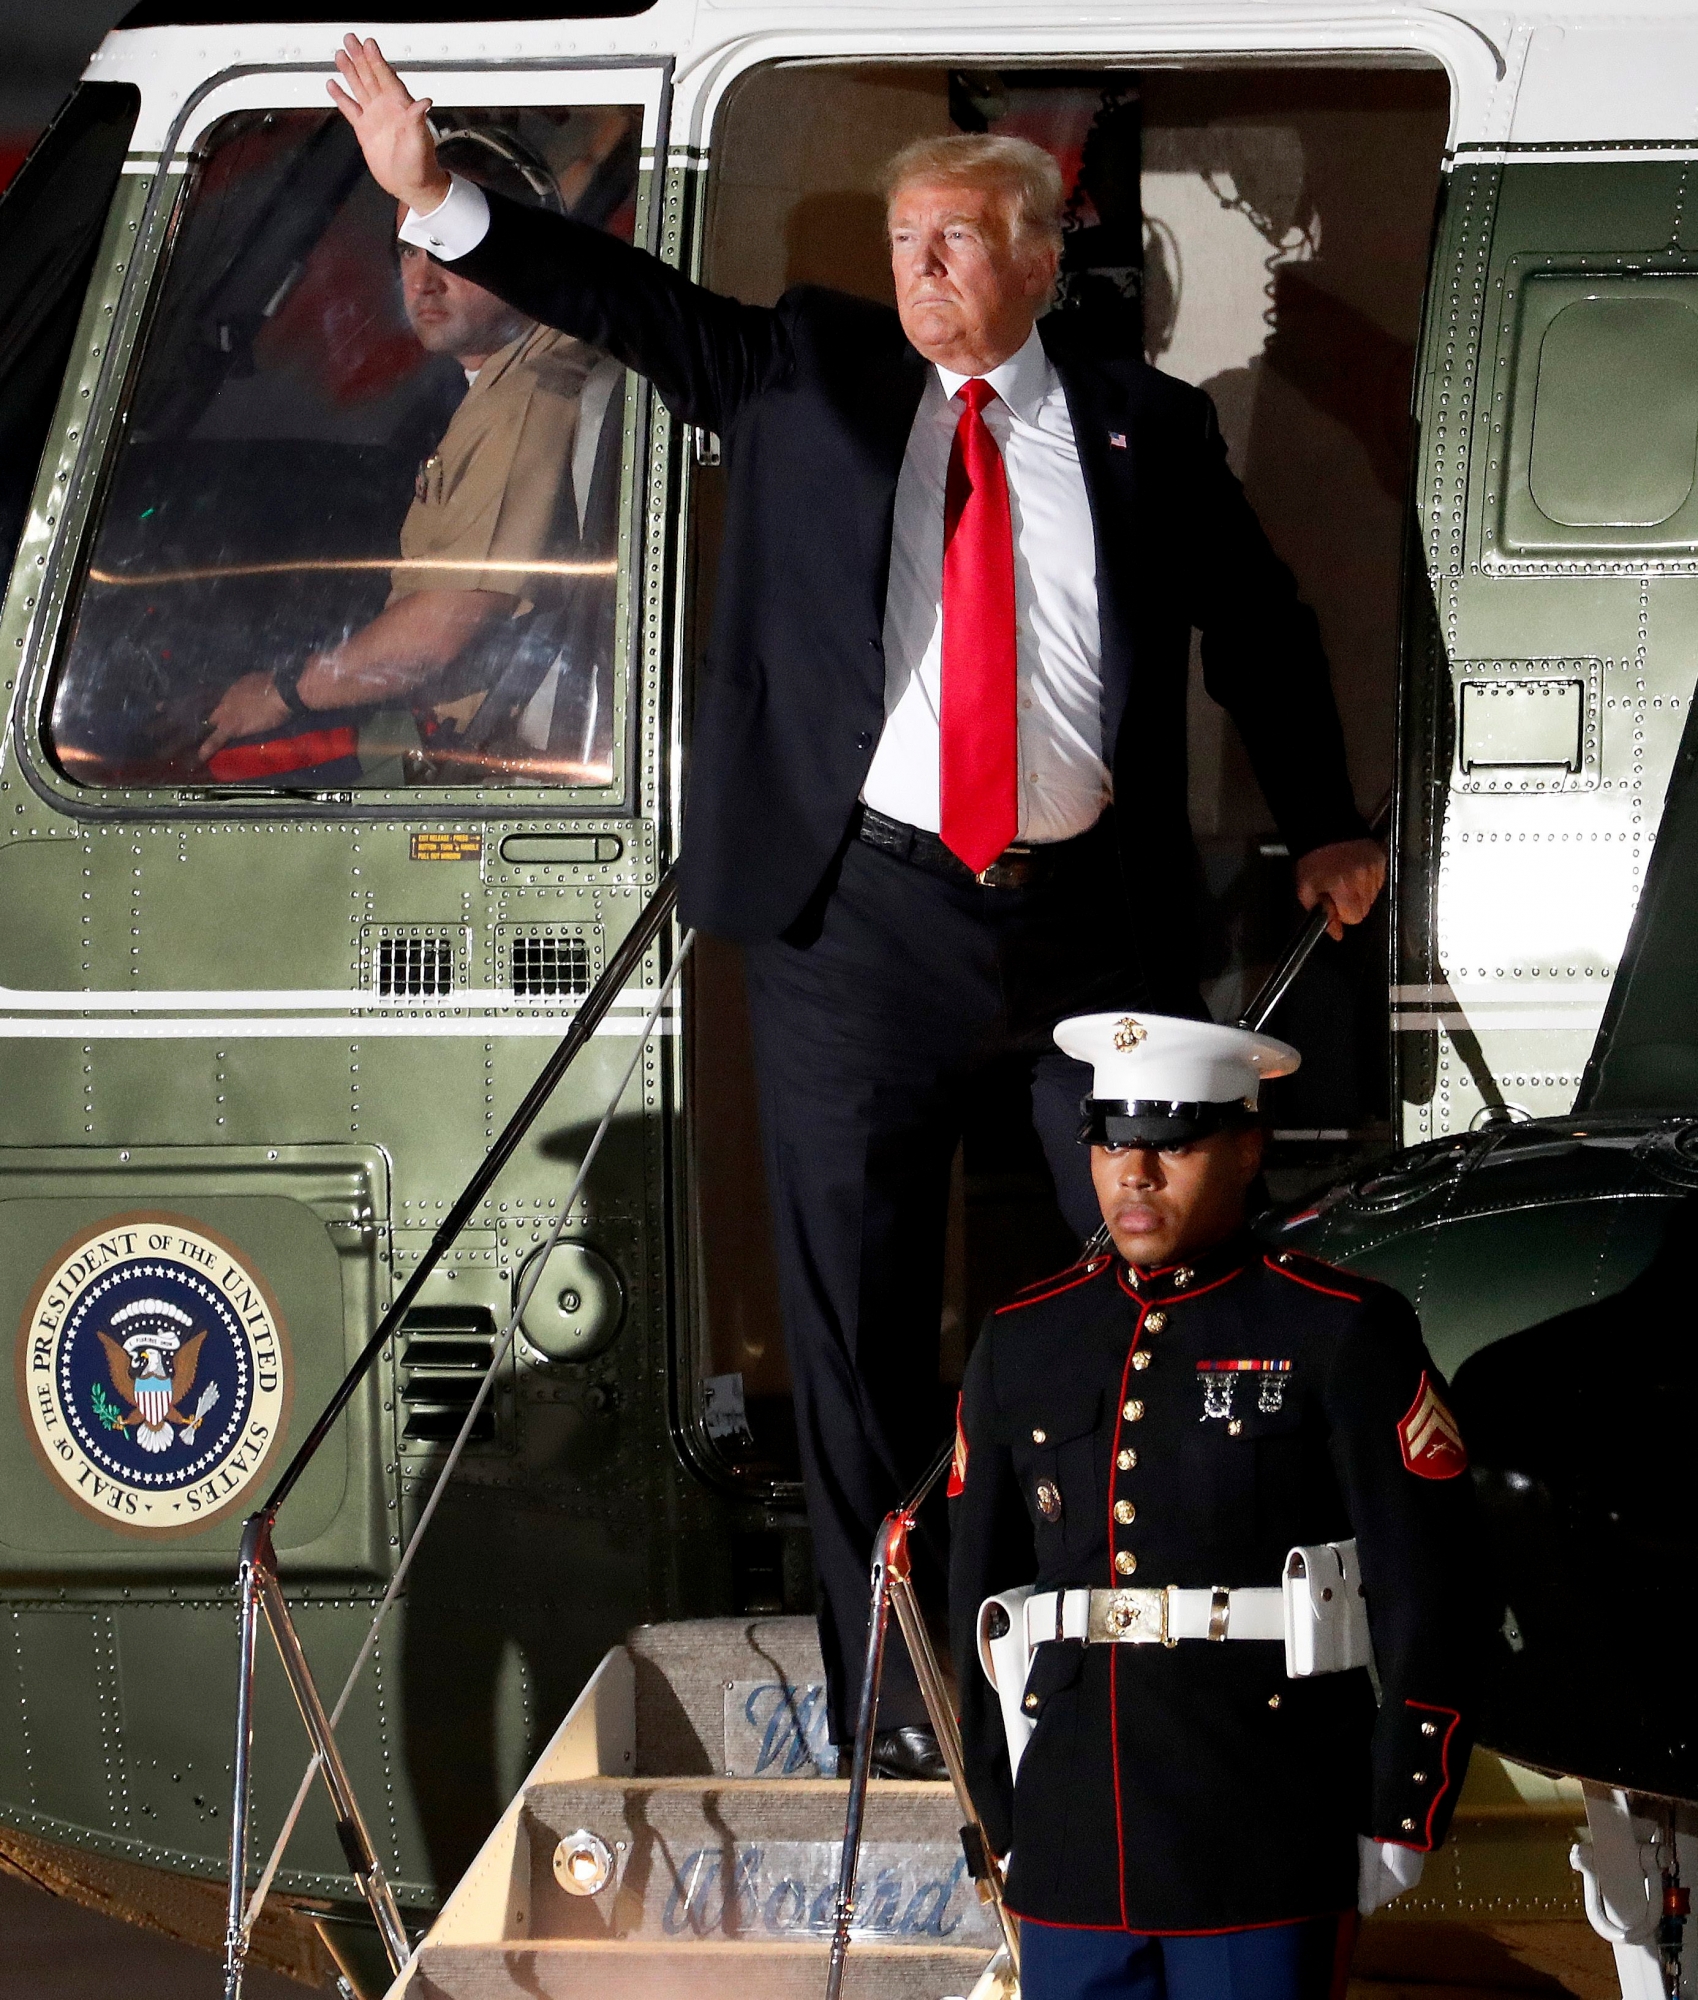 President Donald Trump waves after speaking at a campaign rally Friday, Oct. 19, 2018, in Mesa, Ariz. Trump is in Arizona stumping for Senate candidate Martha McSally. (AP Photo/Matt York) 2018 Election Trump